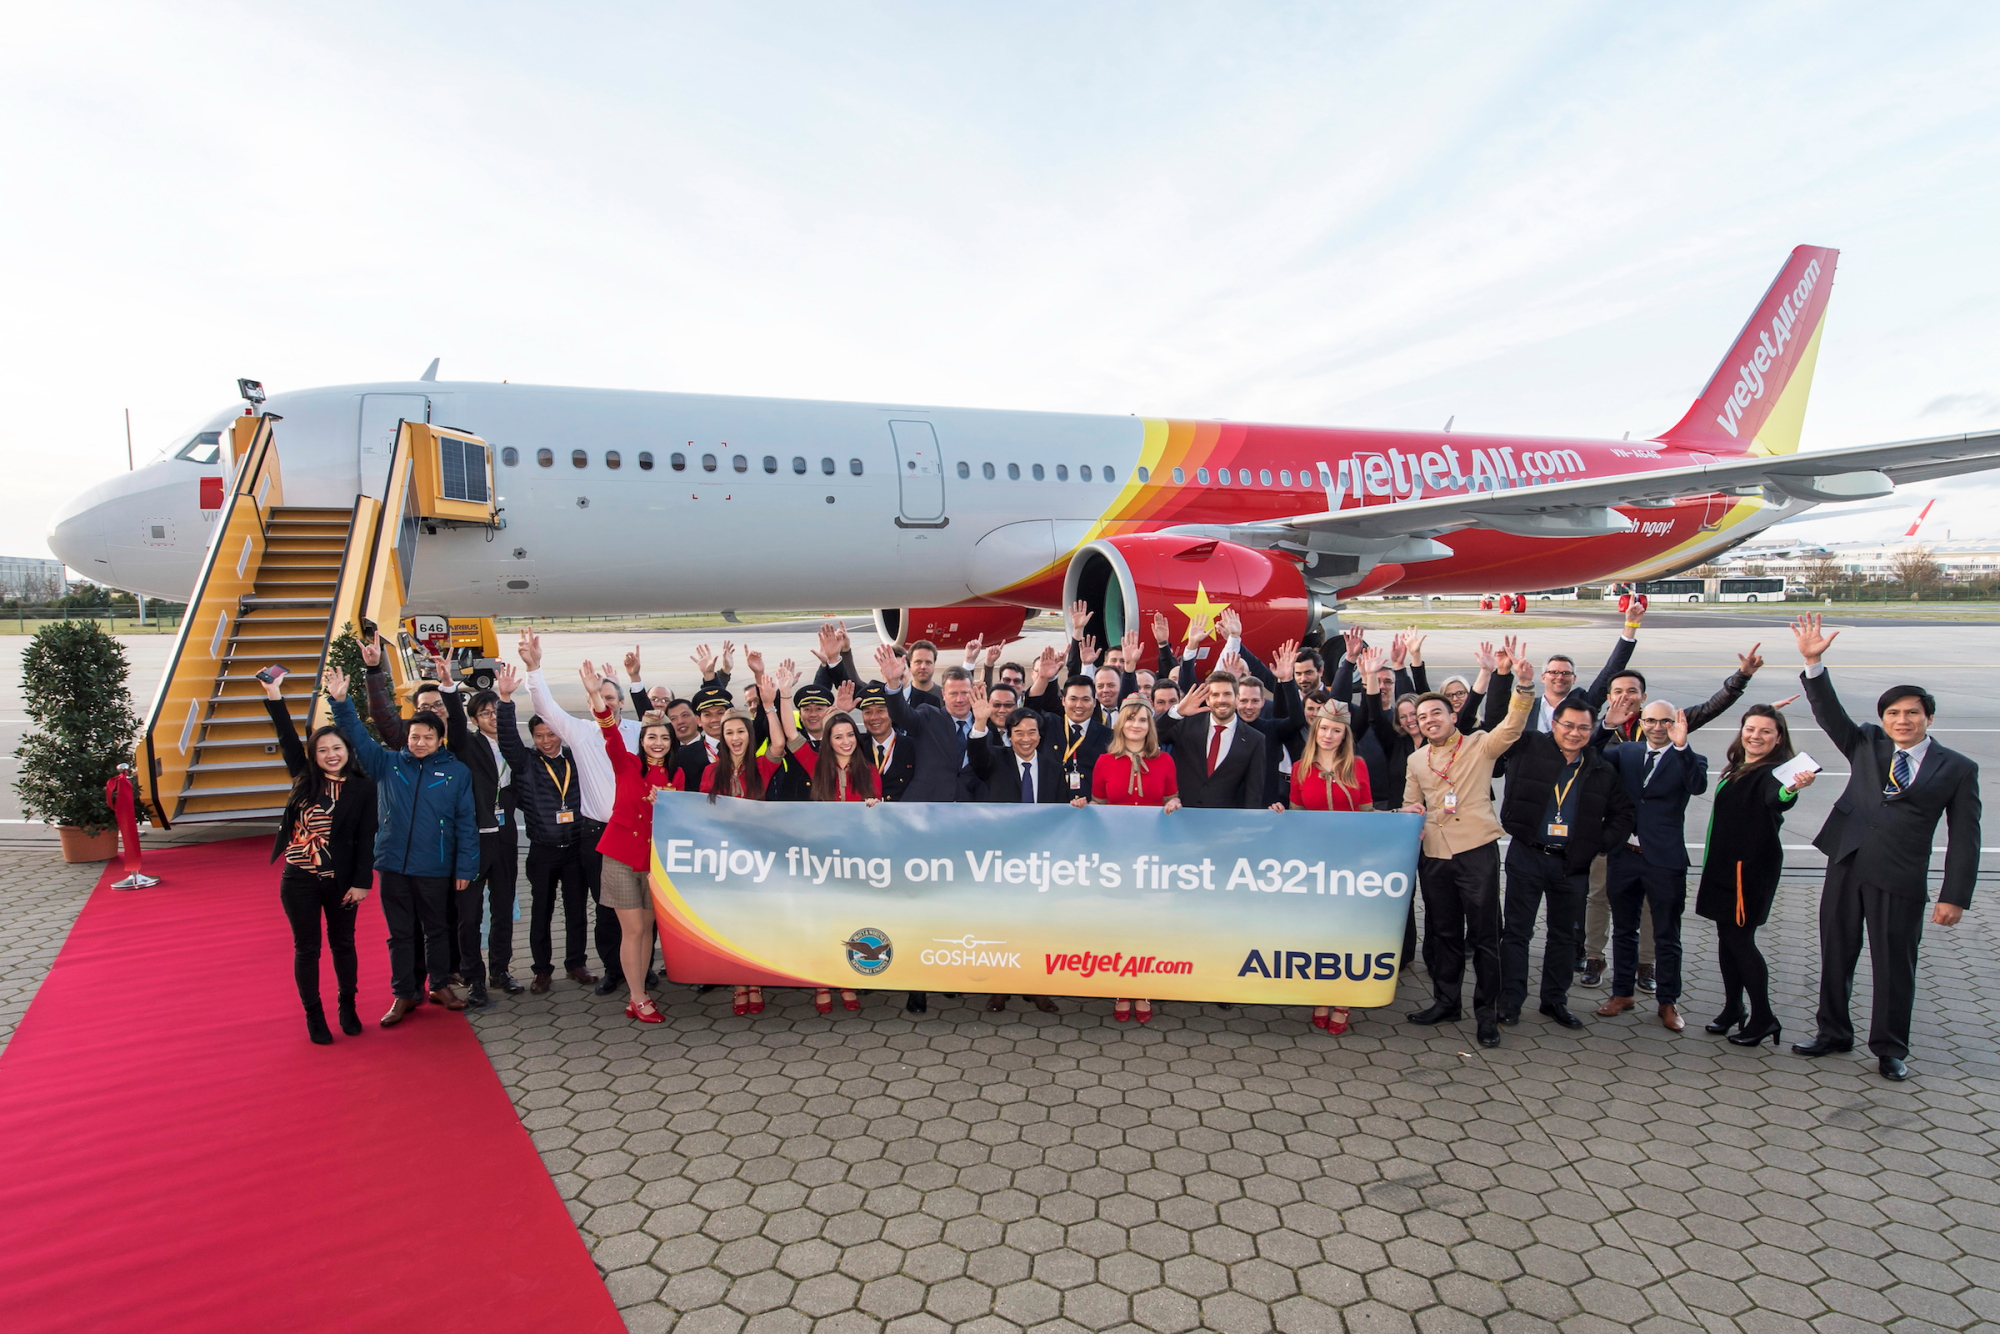 The A321neo (new engine option), registered as VN-646, was transferred to Vietjet at Airbus factory in Hamburg, Germany before heading to Vietnam. Click to enlarge.